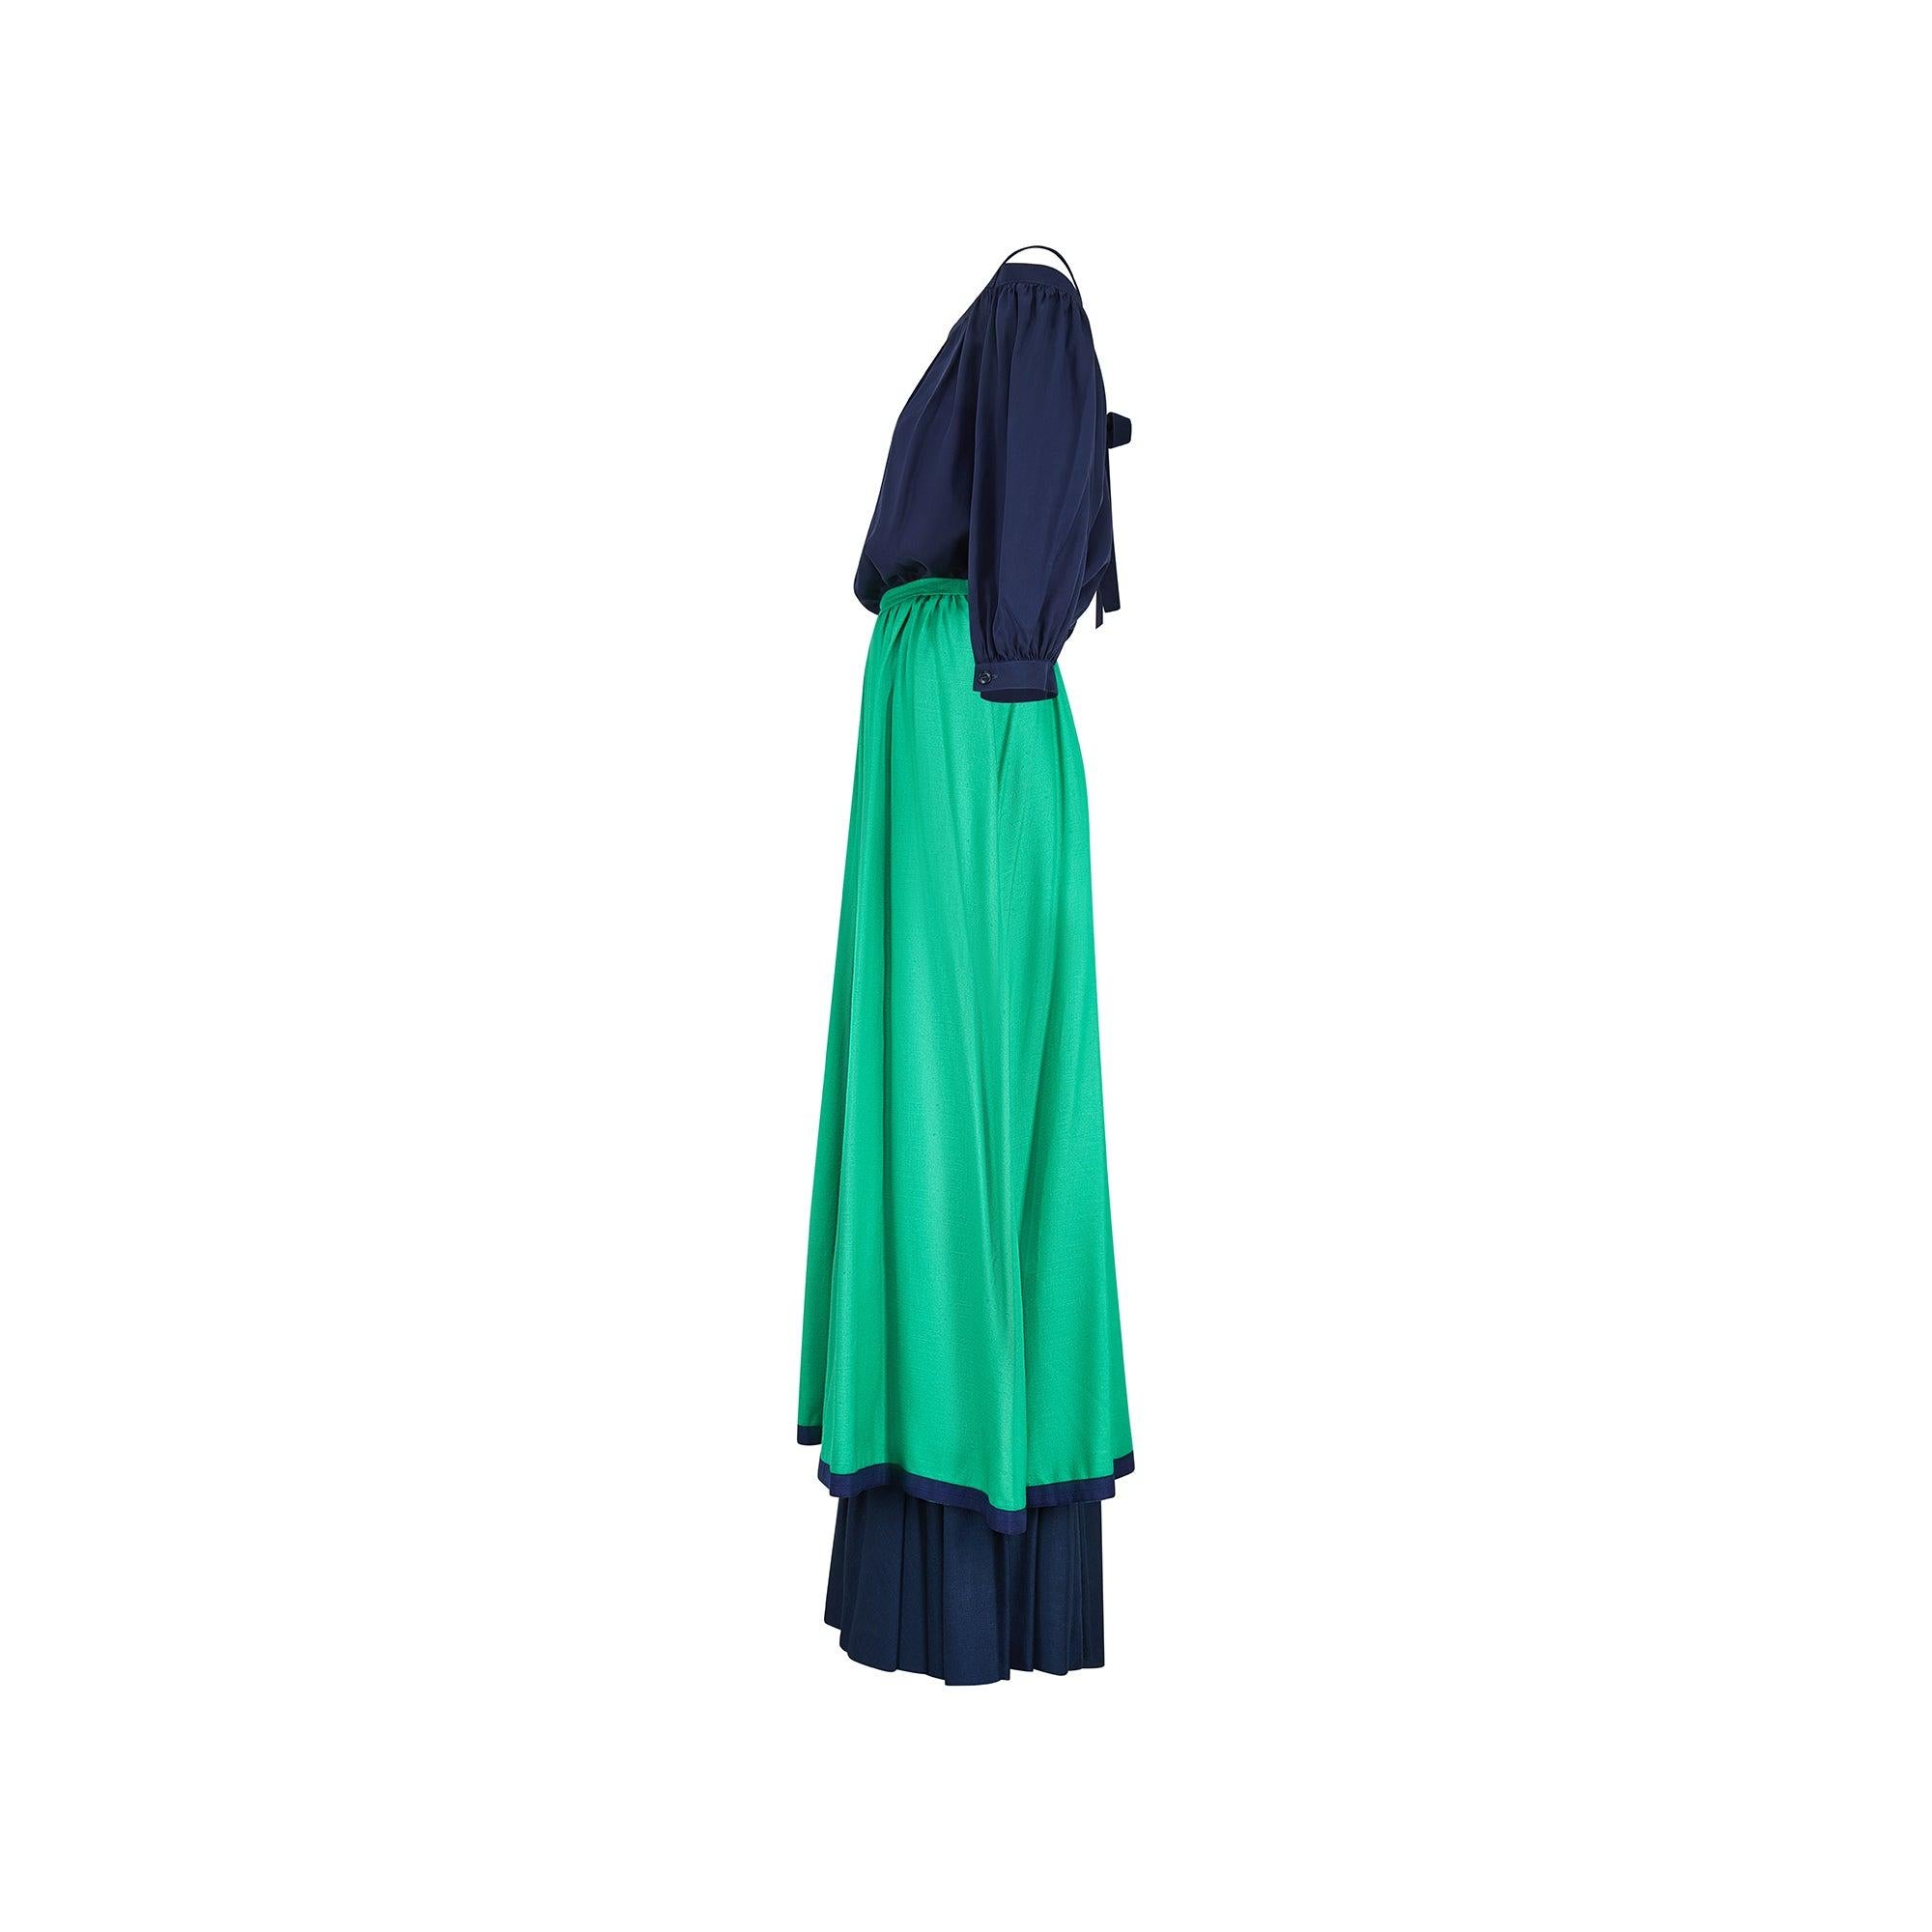 French couturier, Hubert de Givenchy, was still at the helm of his eponymous fashion house when this complete ensemble walked the brand’s runway for the spring / summer 1977 ready to wear collection. This two-piece is made up of a navy-blue silk